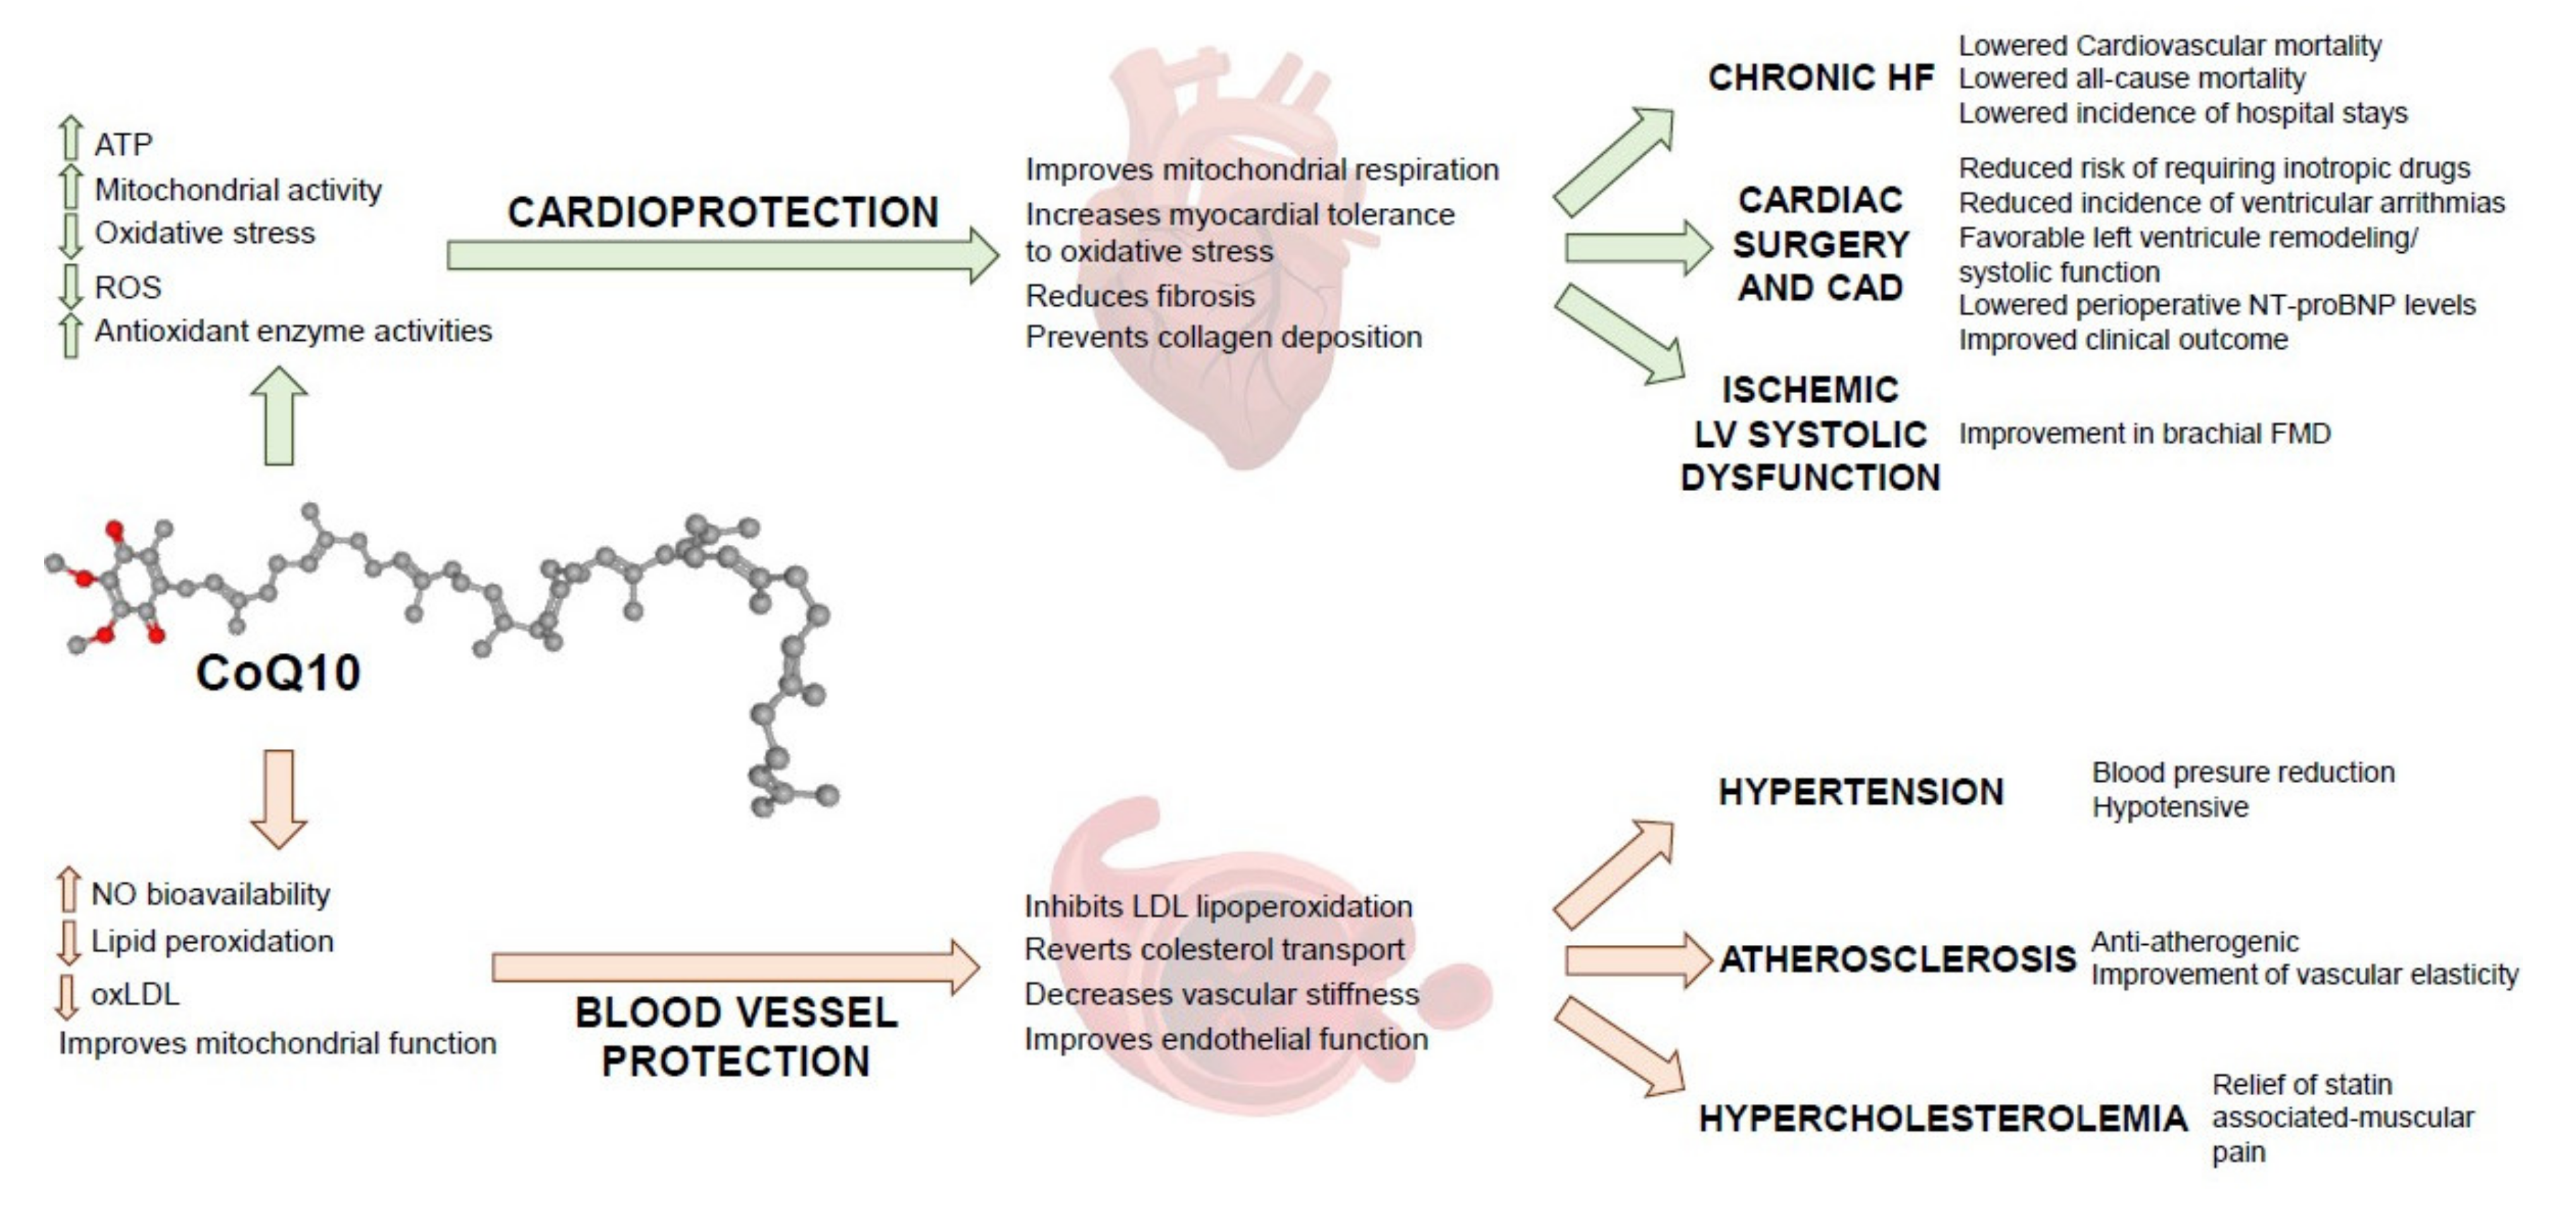 Coenzyme Q and cholesterol regulation